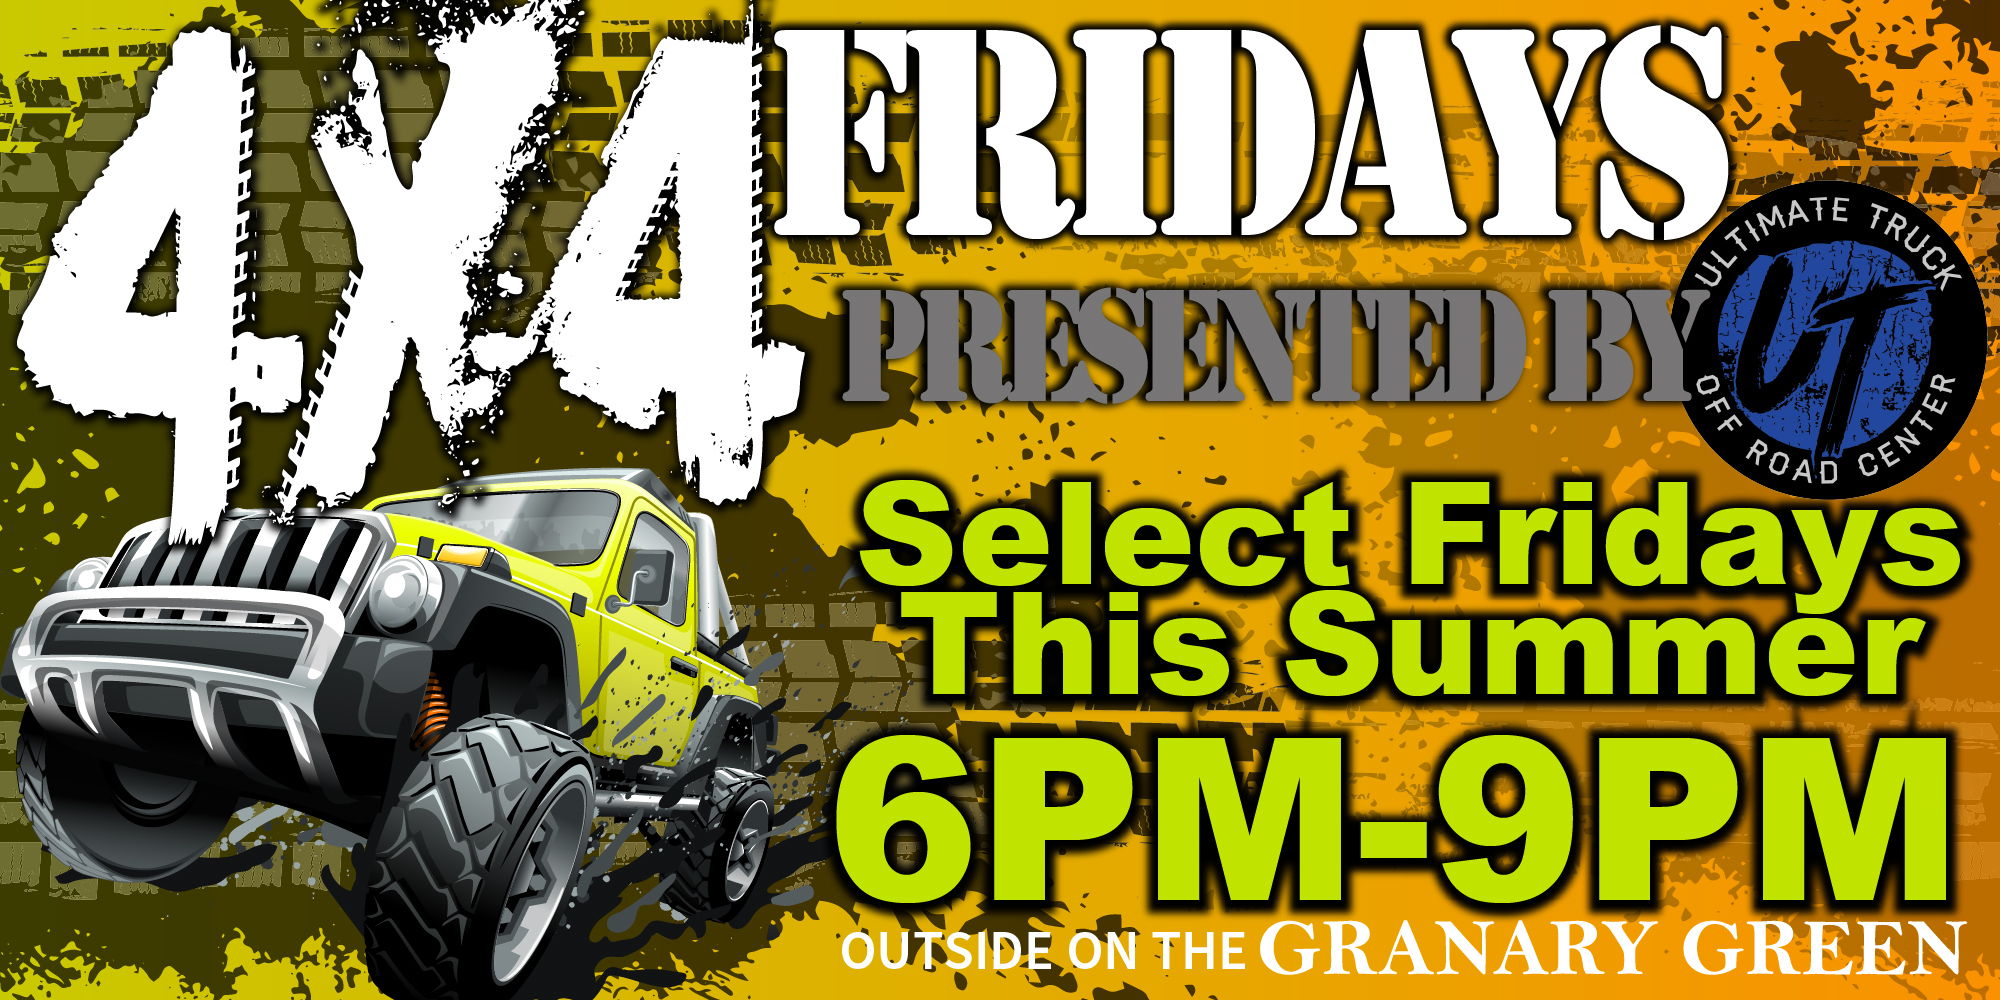 4X4 Friday, Presented by Ultimate Truck Off Road promotional image